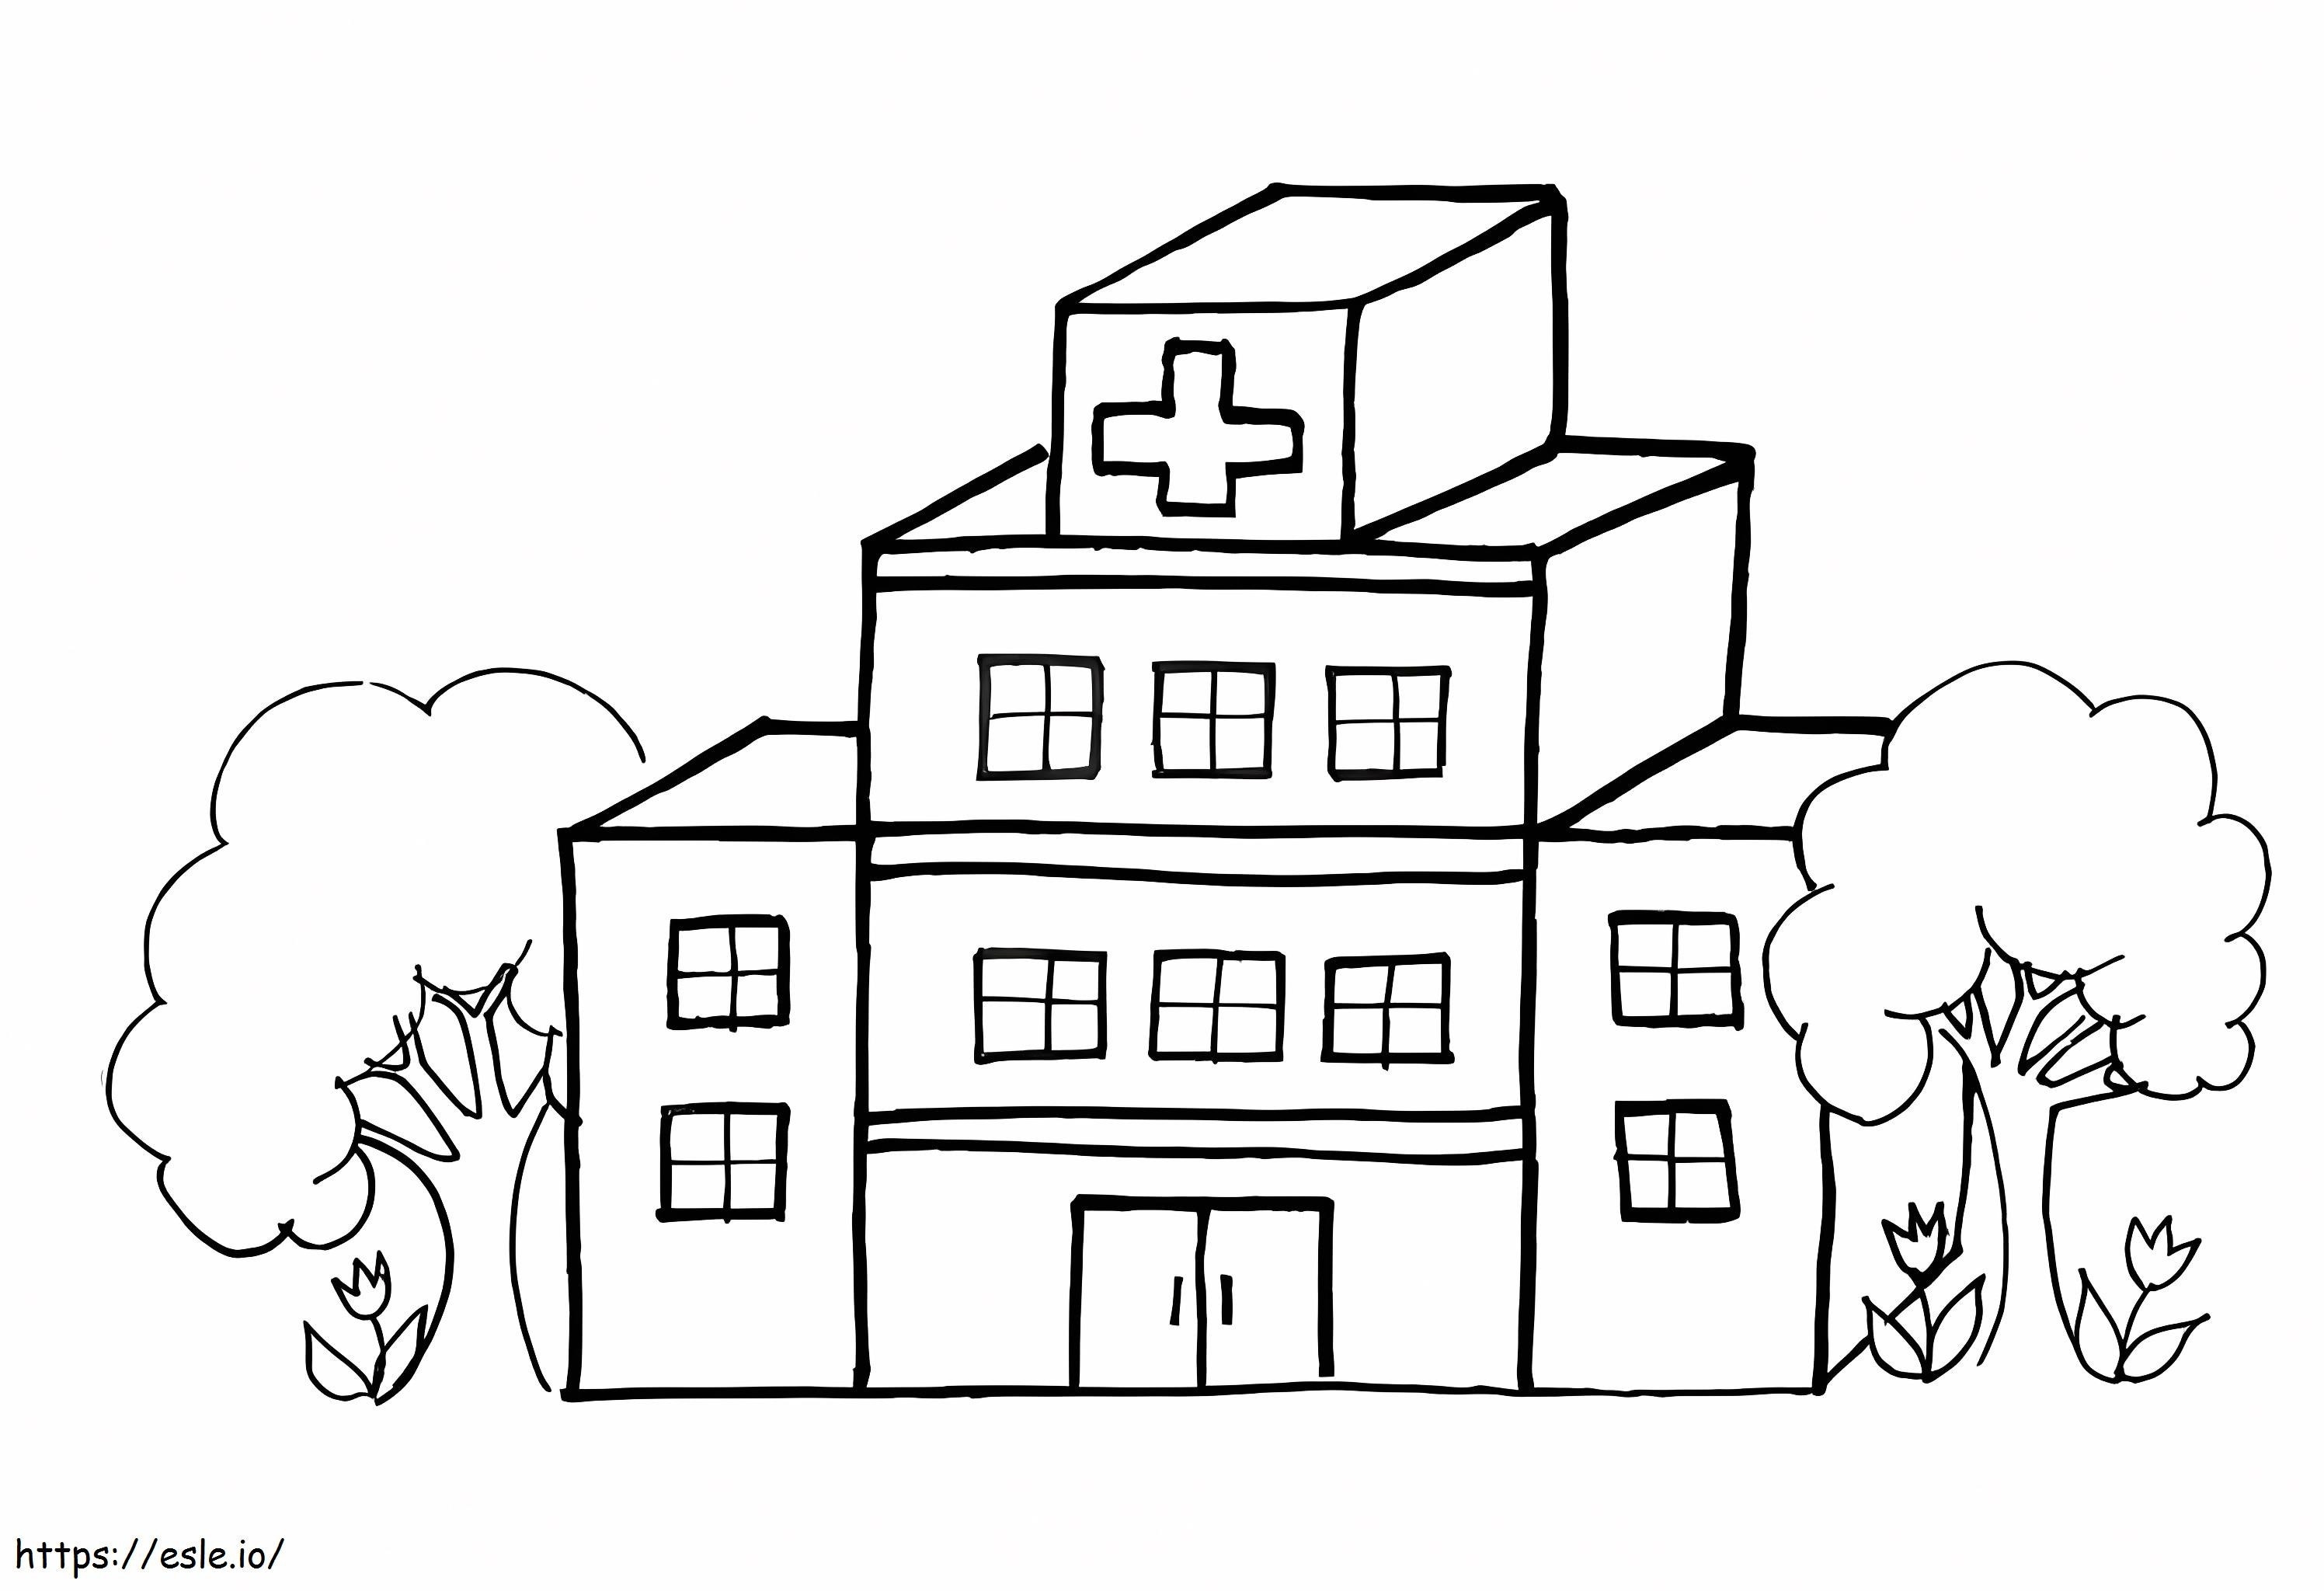 Easy Hospital coloring page